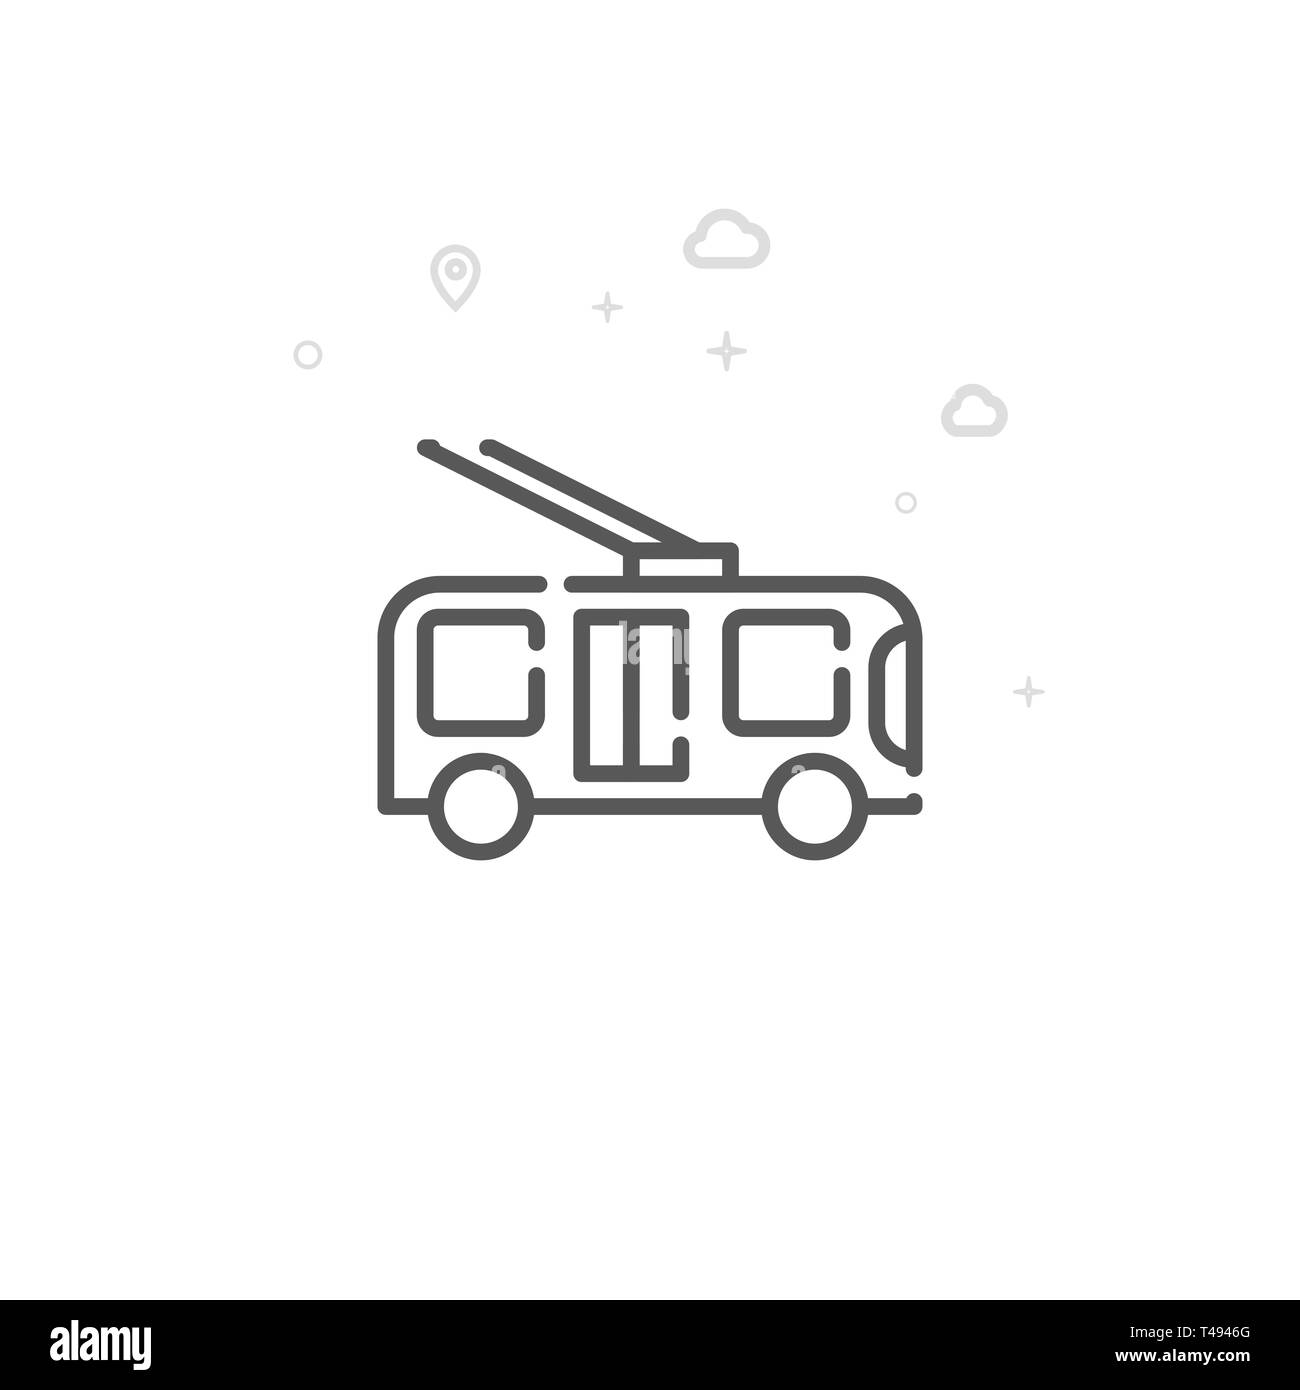 Trolleybus, Trackless Trolley Line Icon. City Urban Transport Symbol, Pictogram, Sign. Light Abstract Geometric Background. Stock Photo